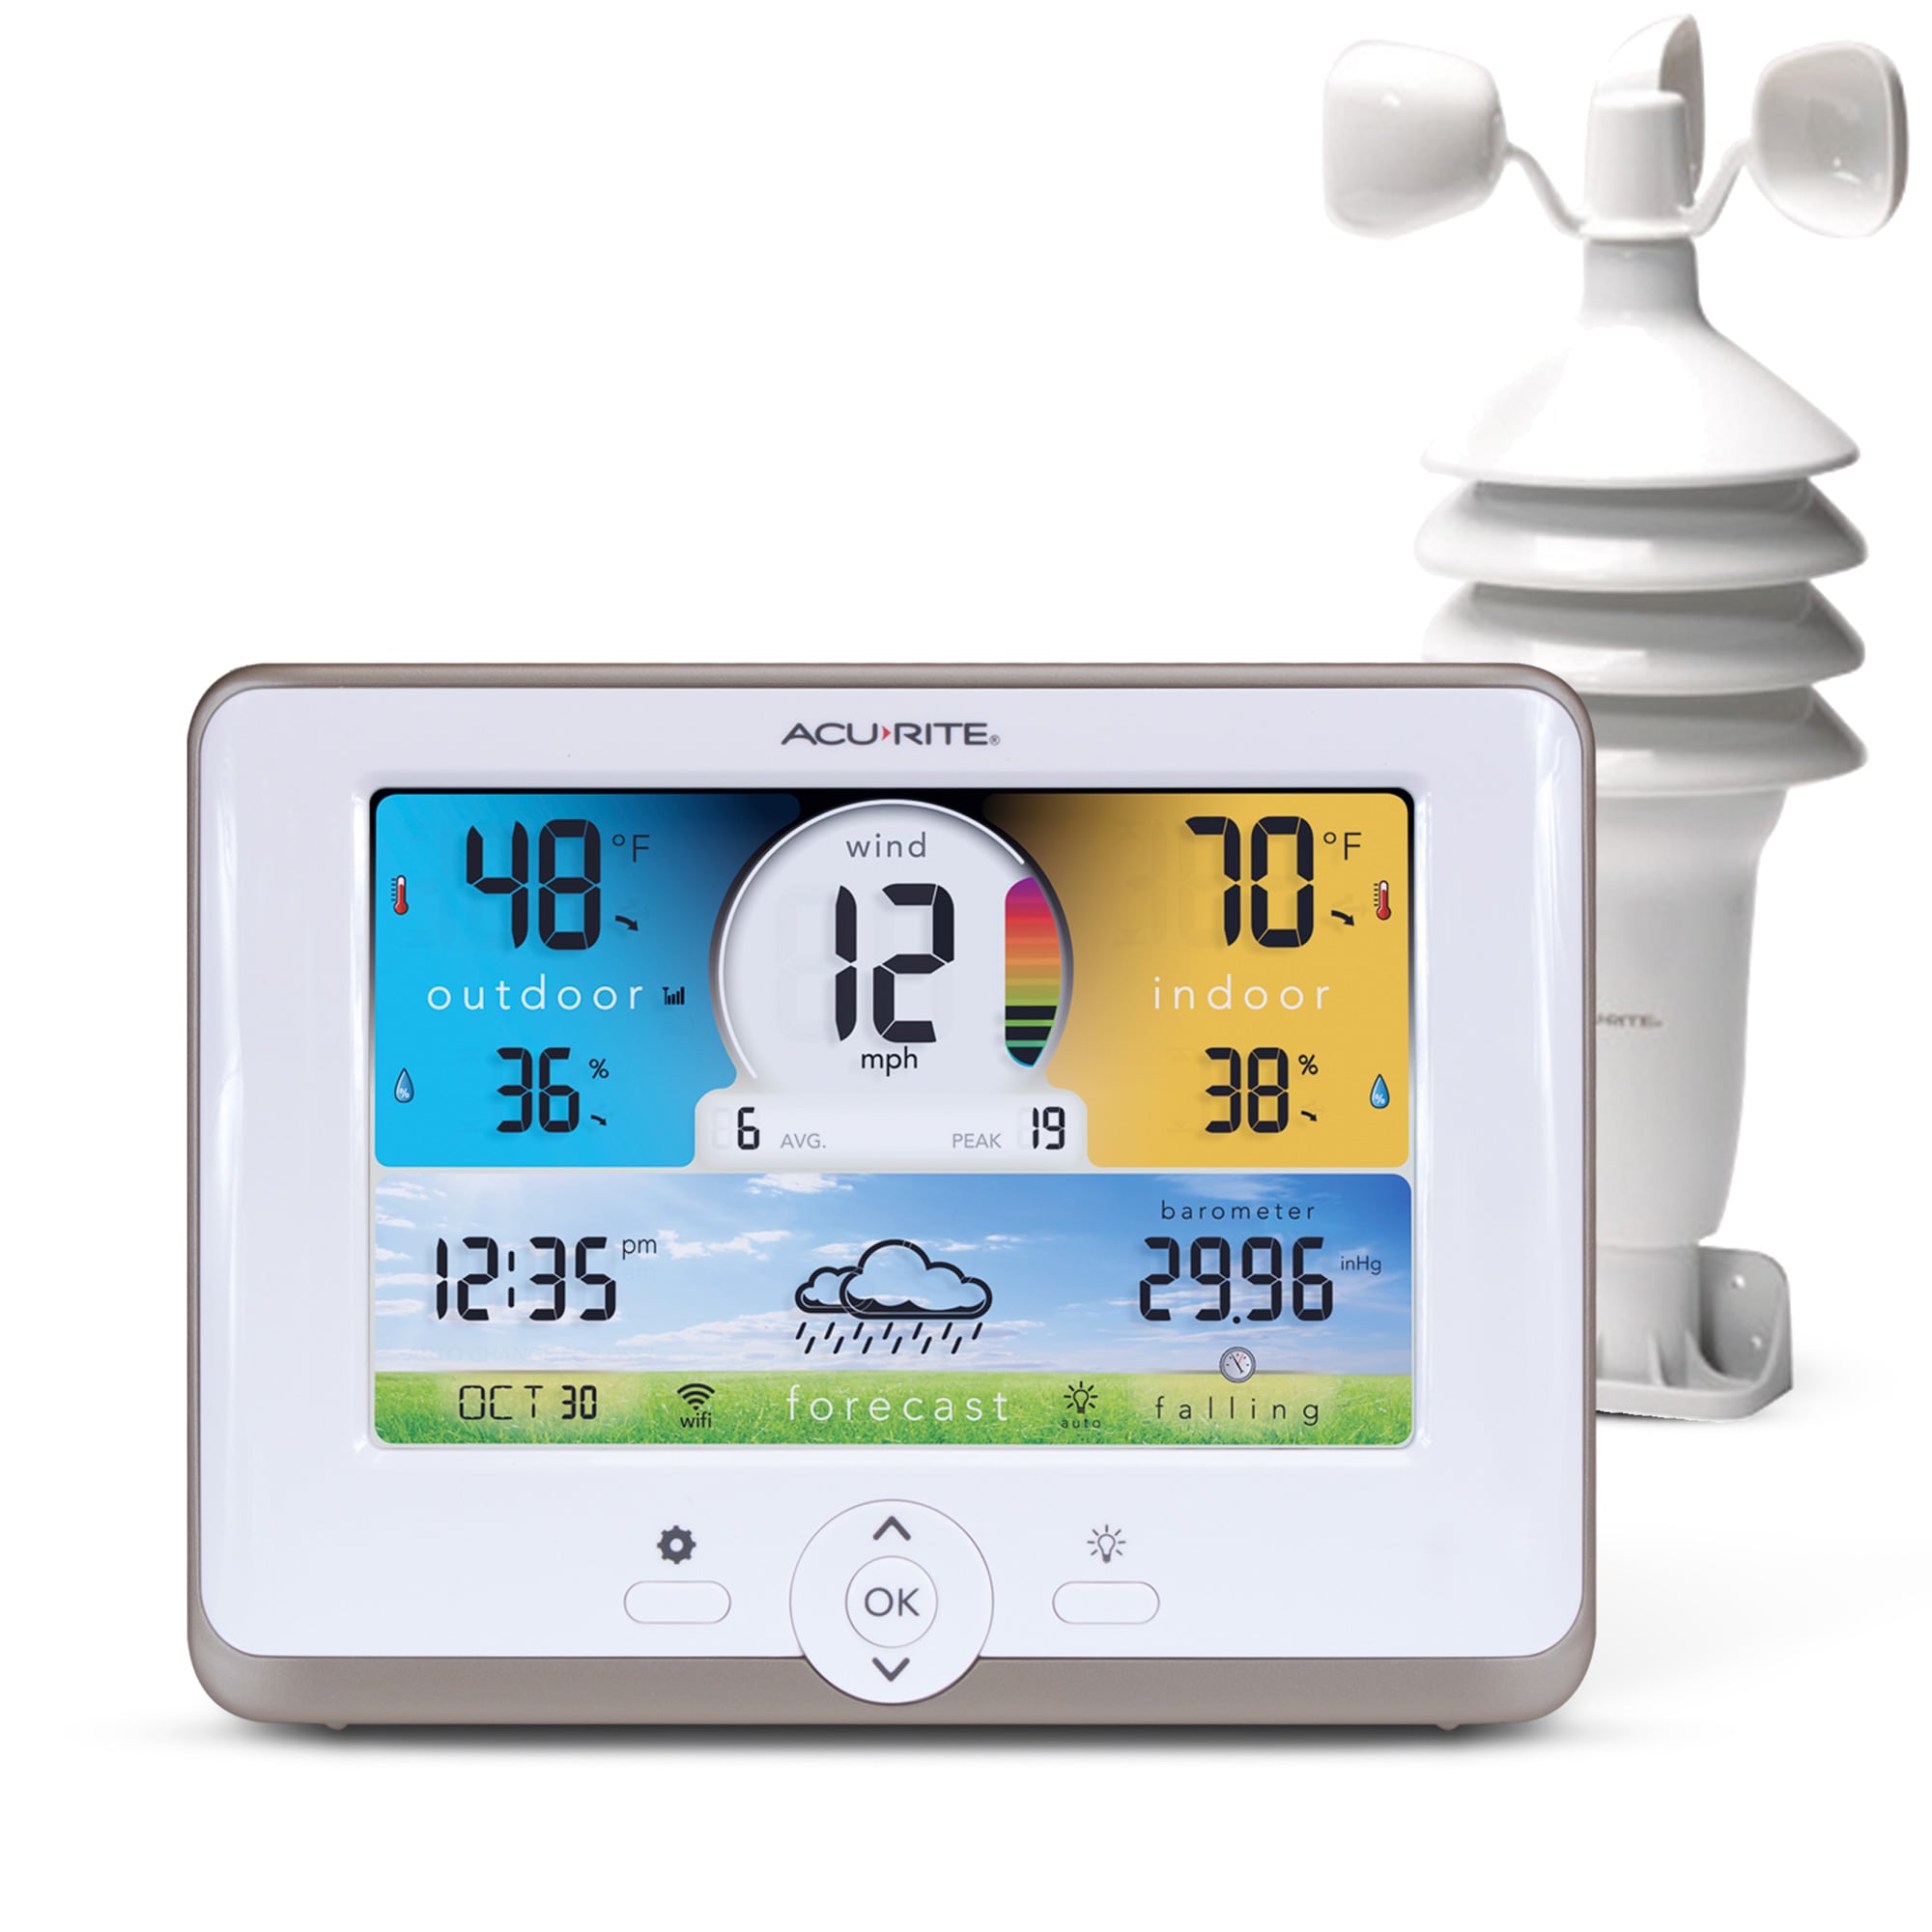 Acurite Home Weather Station With Vertical Color Display : Target